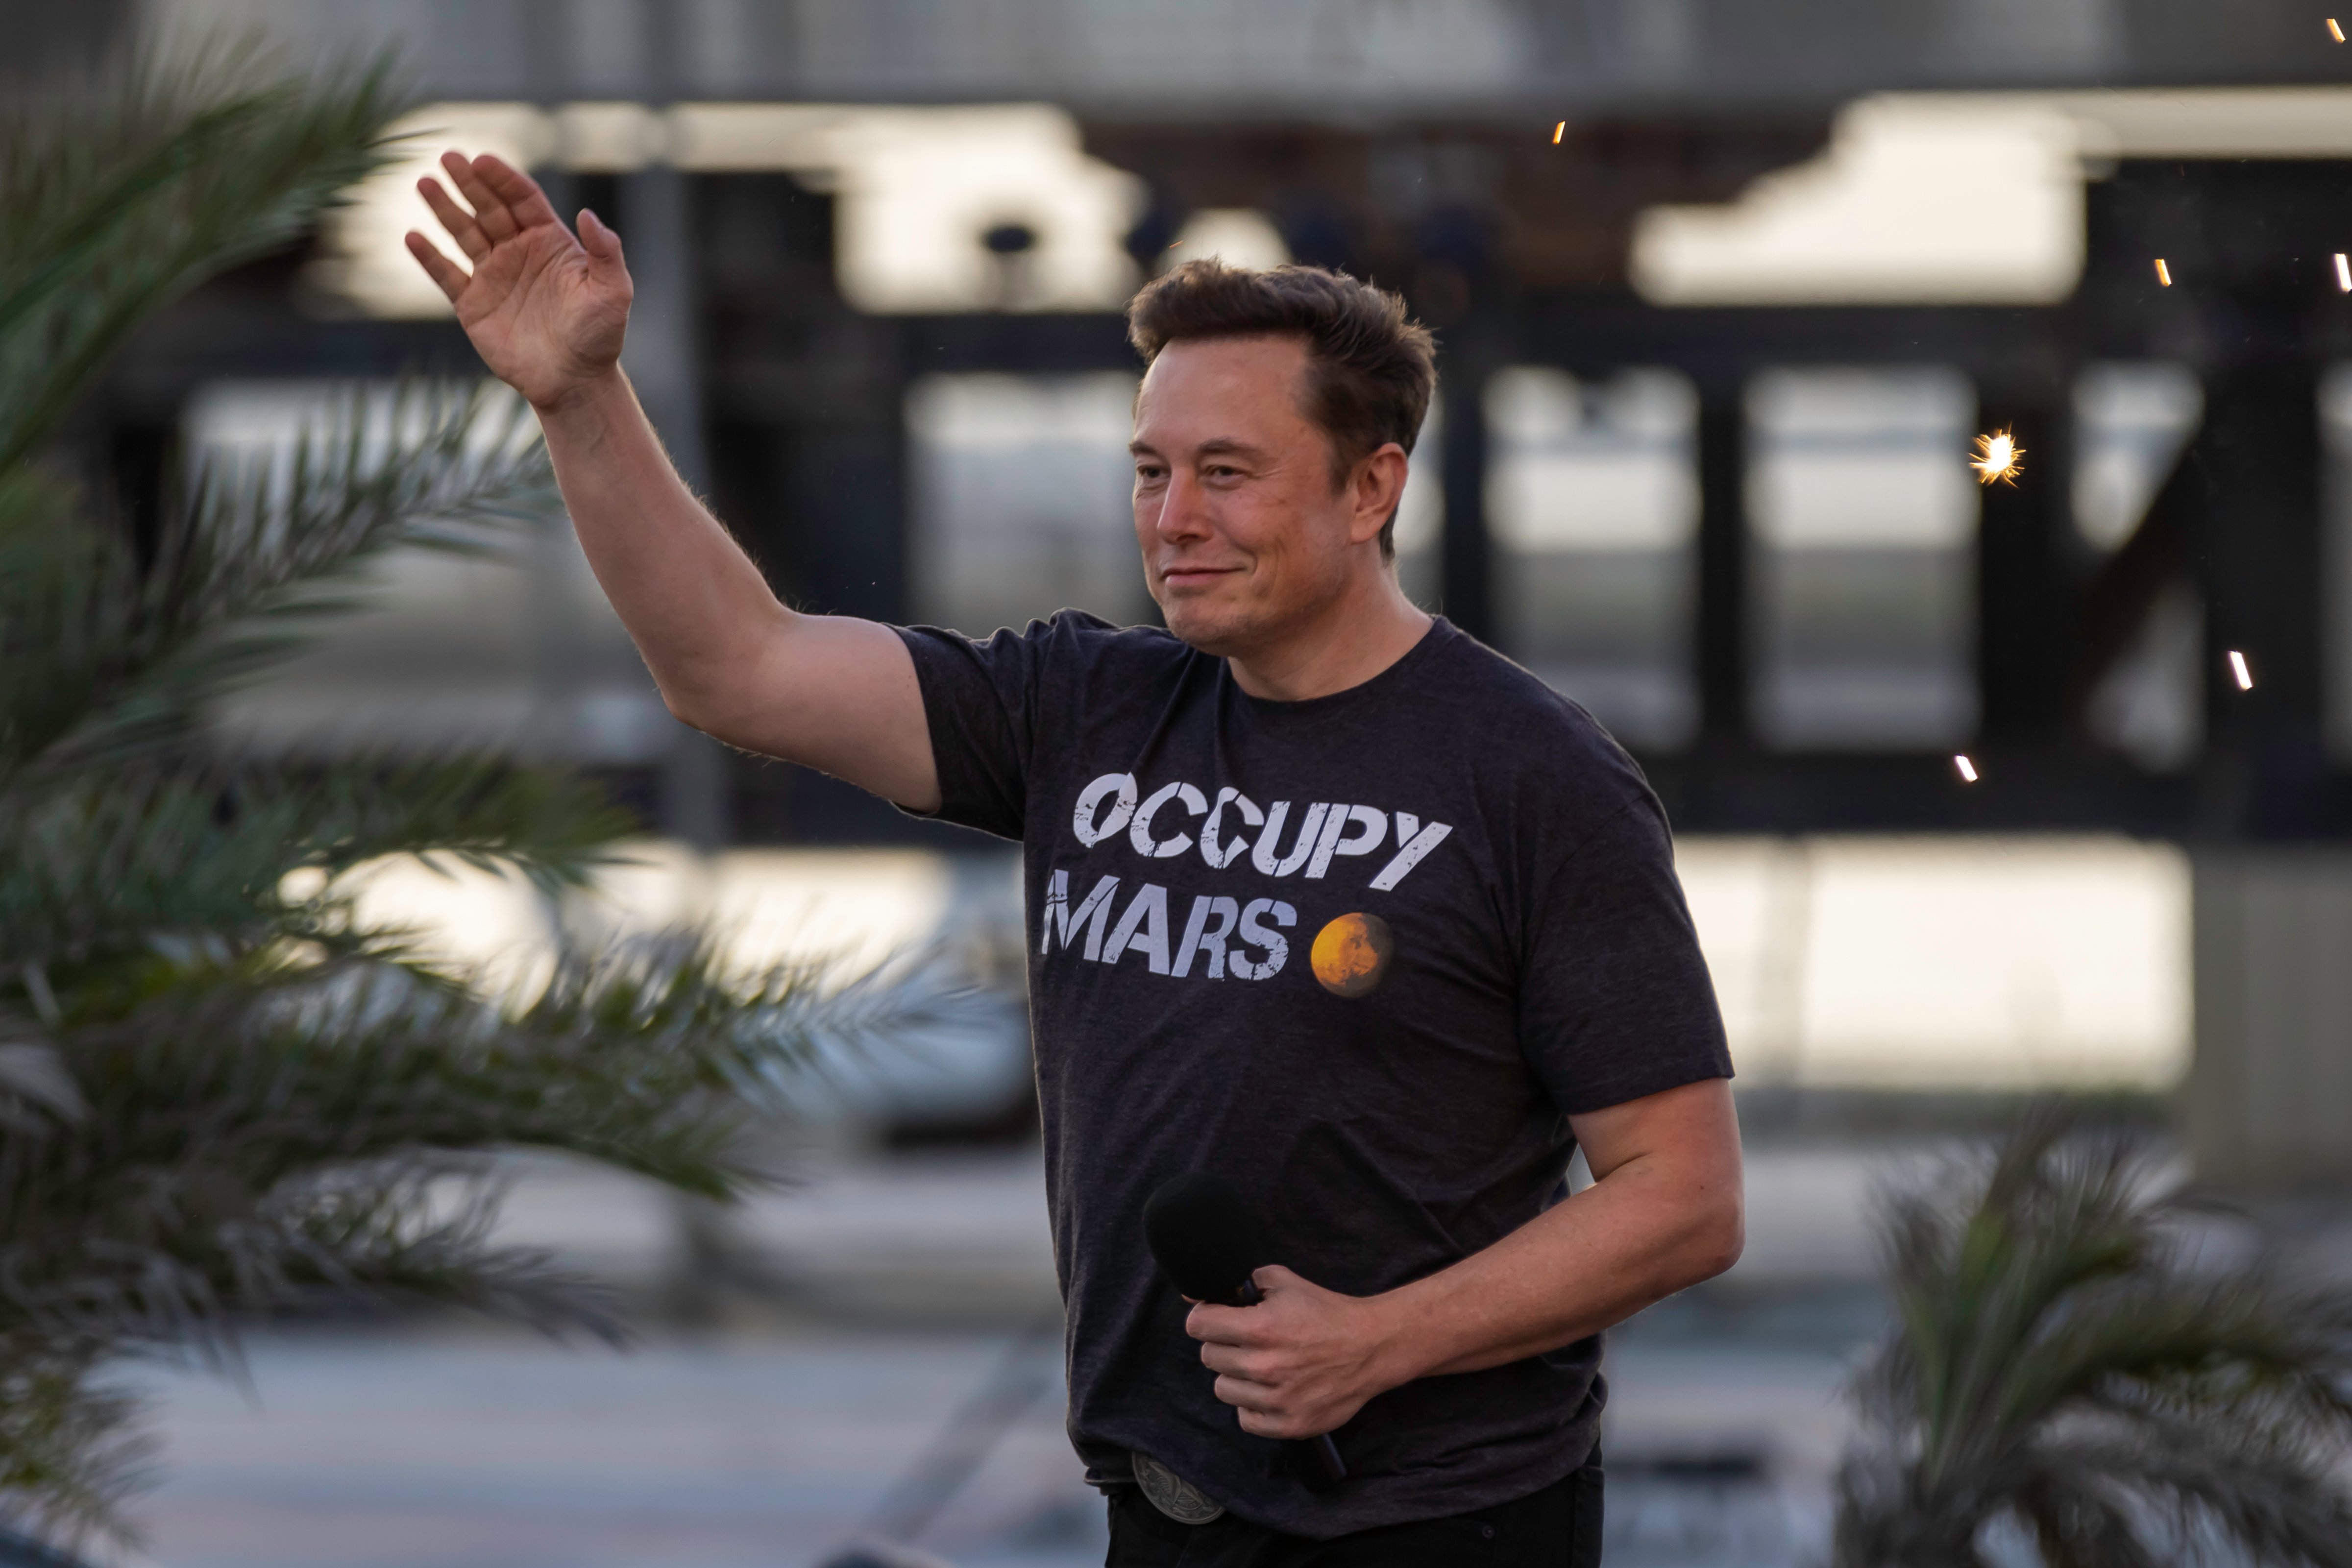 BOCA CHICA BEACH, TX - AUGUST 25: SpaceX founder Elon Musk walks on stage during a T-Mobile and SpaceX joint event on August 25, 2022 in Boca Chica Beach, Texas. The two companies announced plans to work together to provide T-Mobile cellular service using Starlink satellites. (Getty Images; 2022 Getty Images)